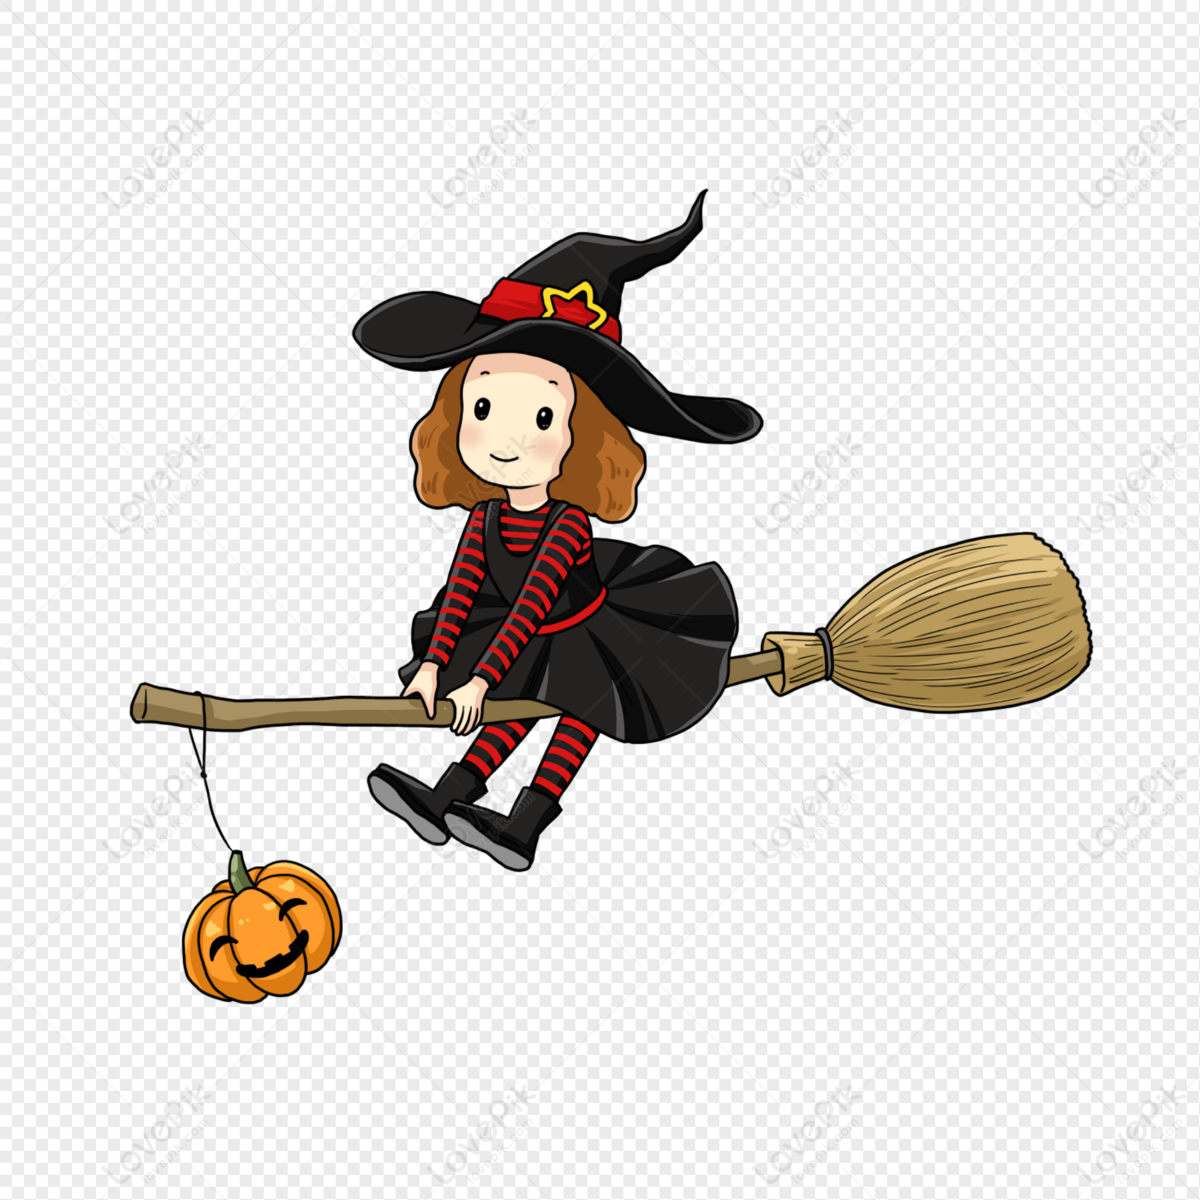 Witch Riding A Broom PNG Transparent Background And Clipart Image For Free  Download - Lovepik | 401634540